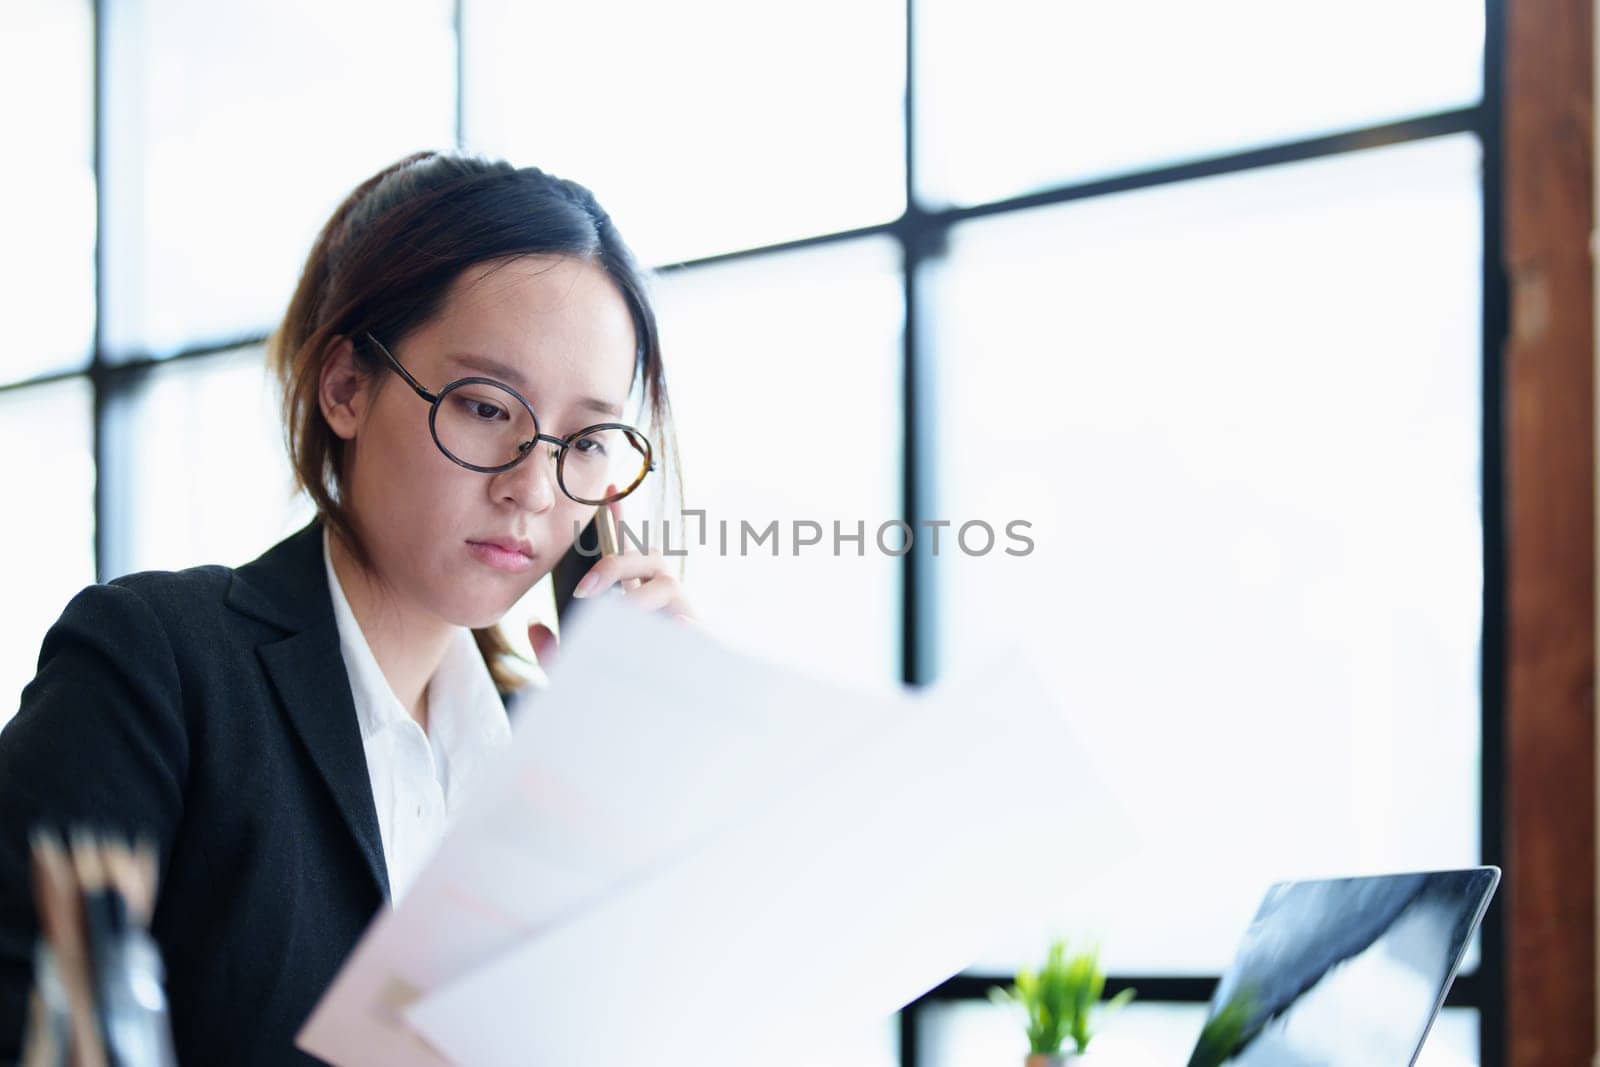 Portrait of a young Asian woman showing a serious face as she uses her phone, financial documents and computer laptop on her desk in the early morning hours by Manastrong